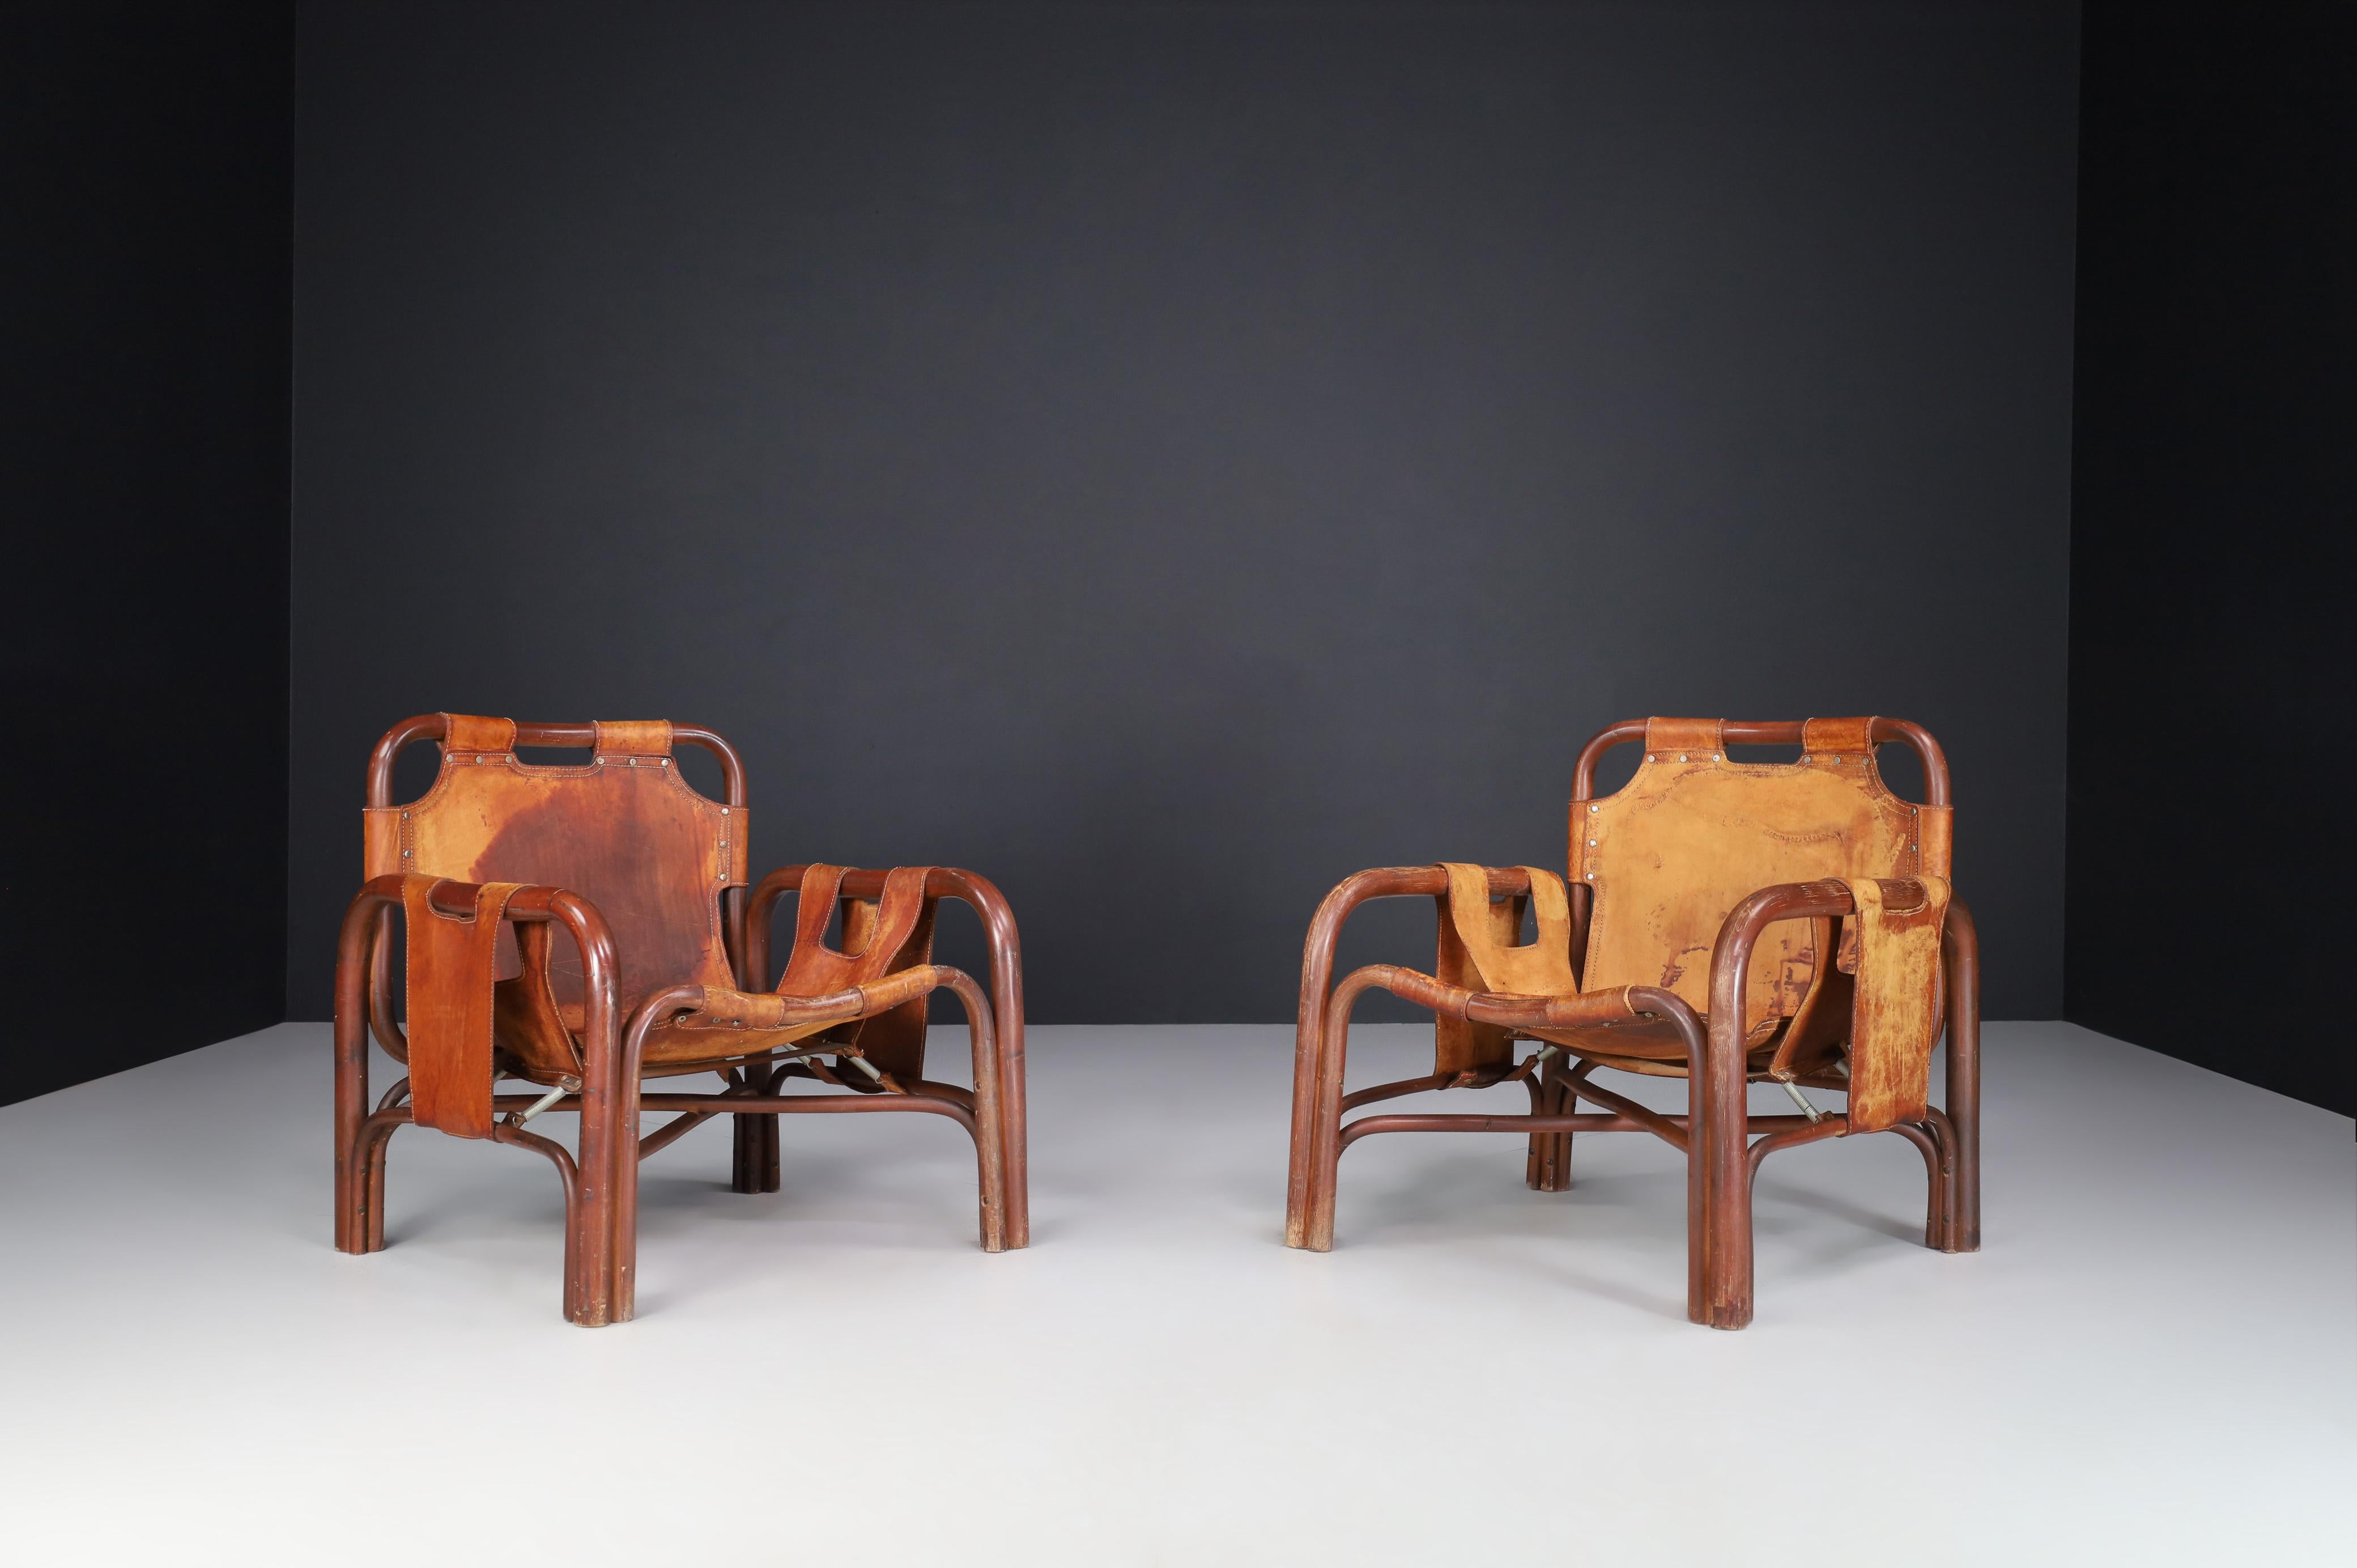 Mid-century patinated leather and rattan lounge chairs by Tito Agnoli Italy, the 1960s.

Rare and unique pair of Italian Mid-Century Modern rattan and patinated leather Lounge chairs by the designer Tito Agnoli for Bonacina, Italy, 1960s. In